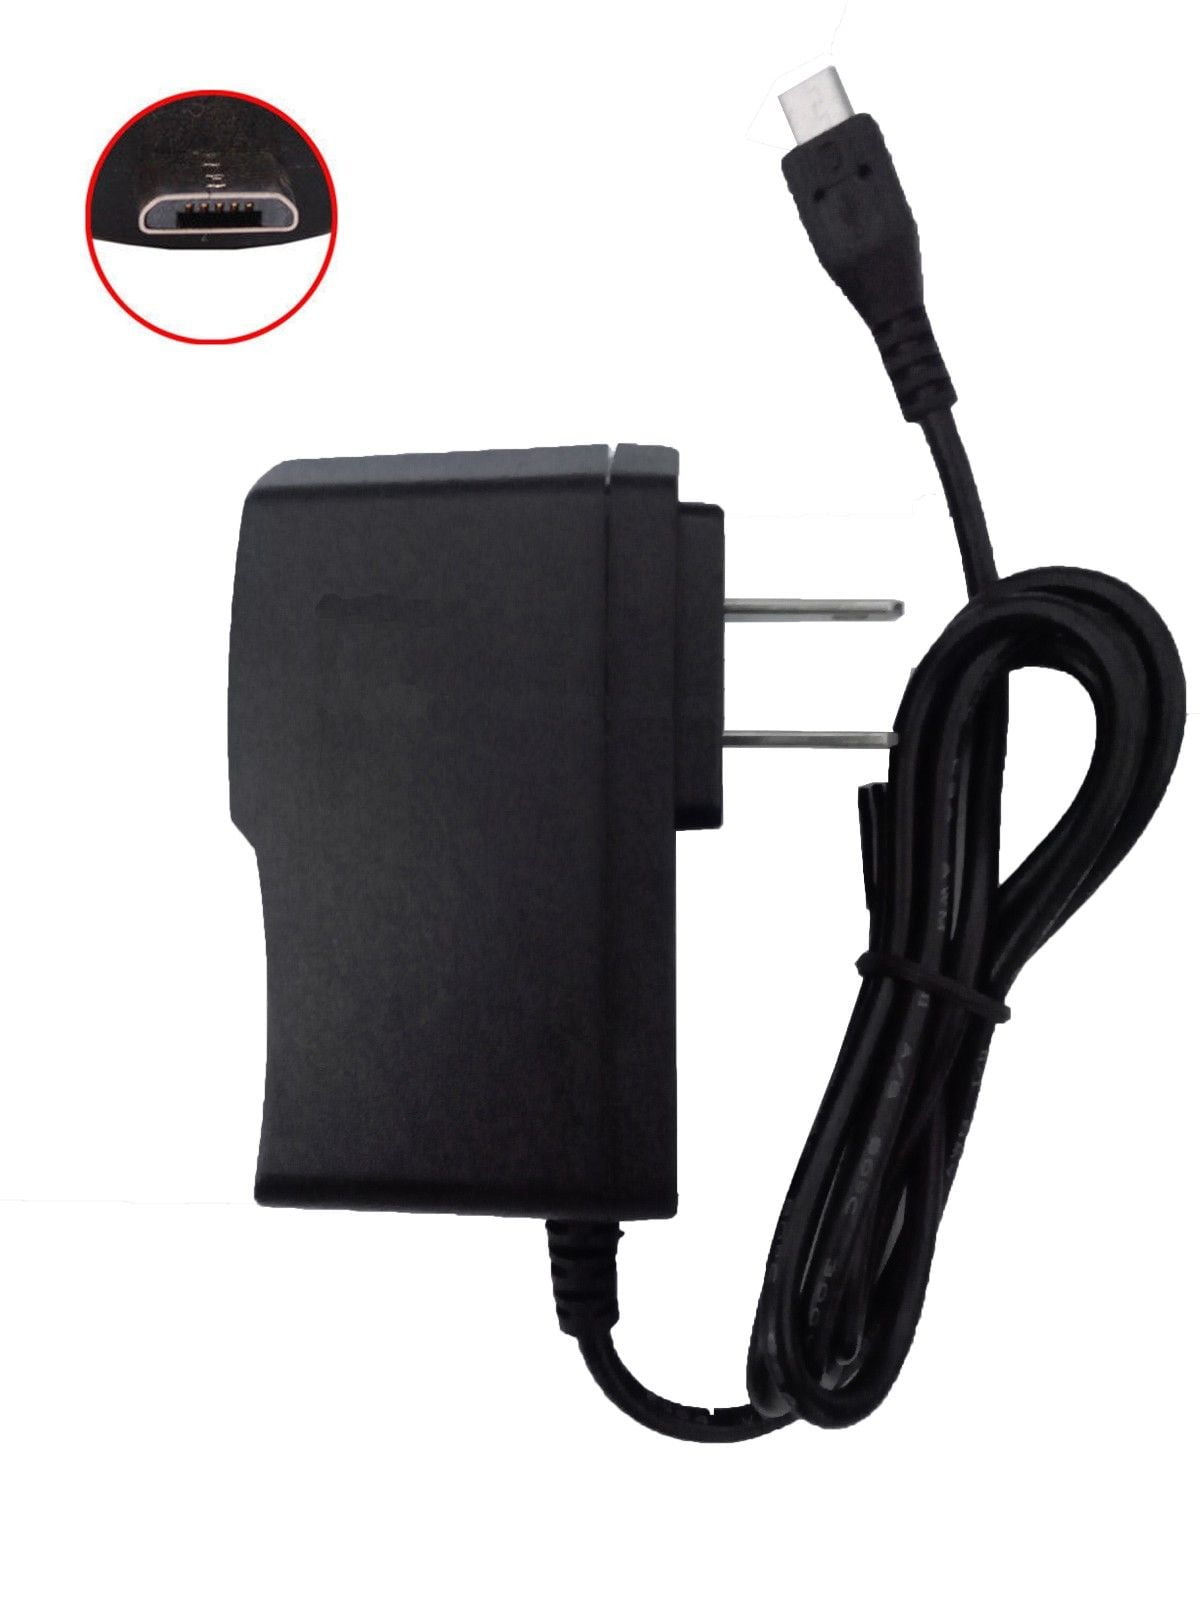 Quick Charging USB Data Charger Cable Cord For Lenovo Yoga Tab3 Plus Tablet PC 